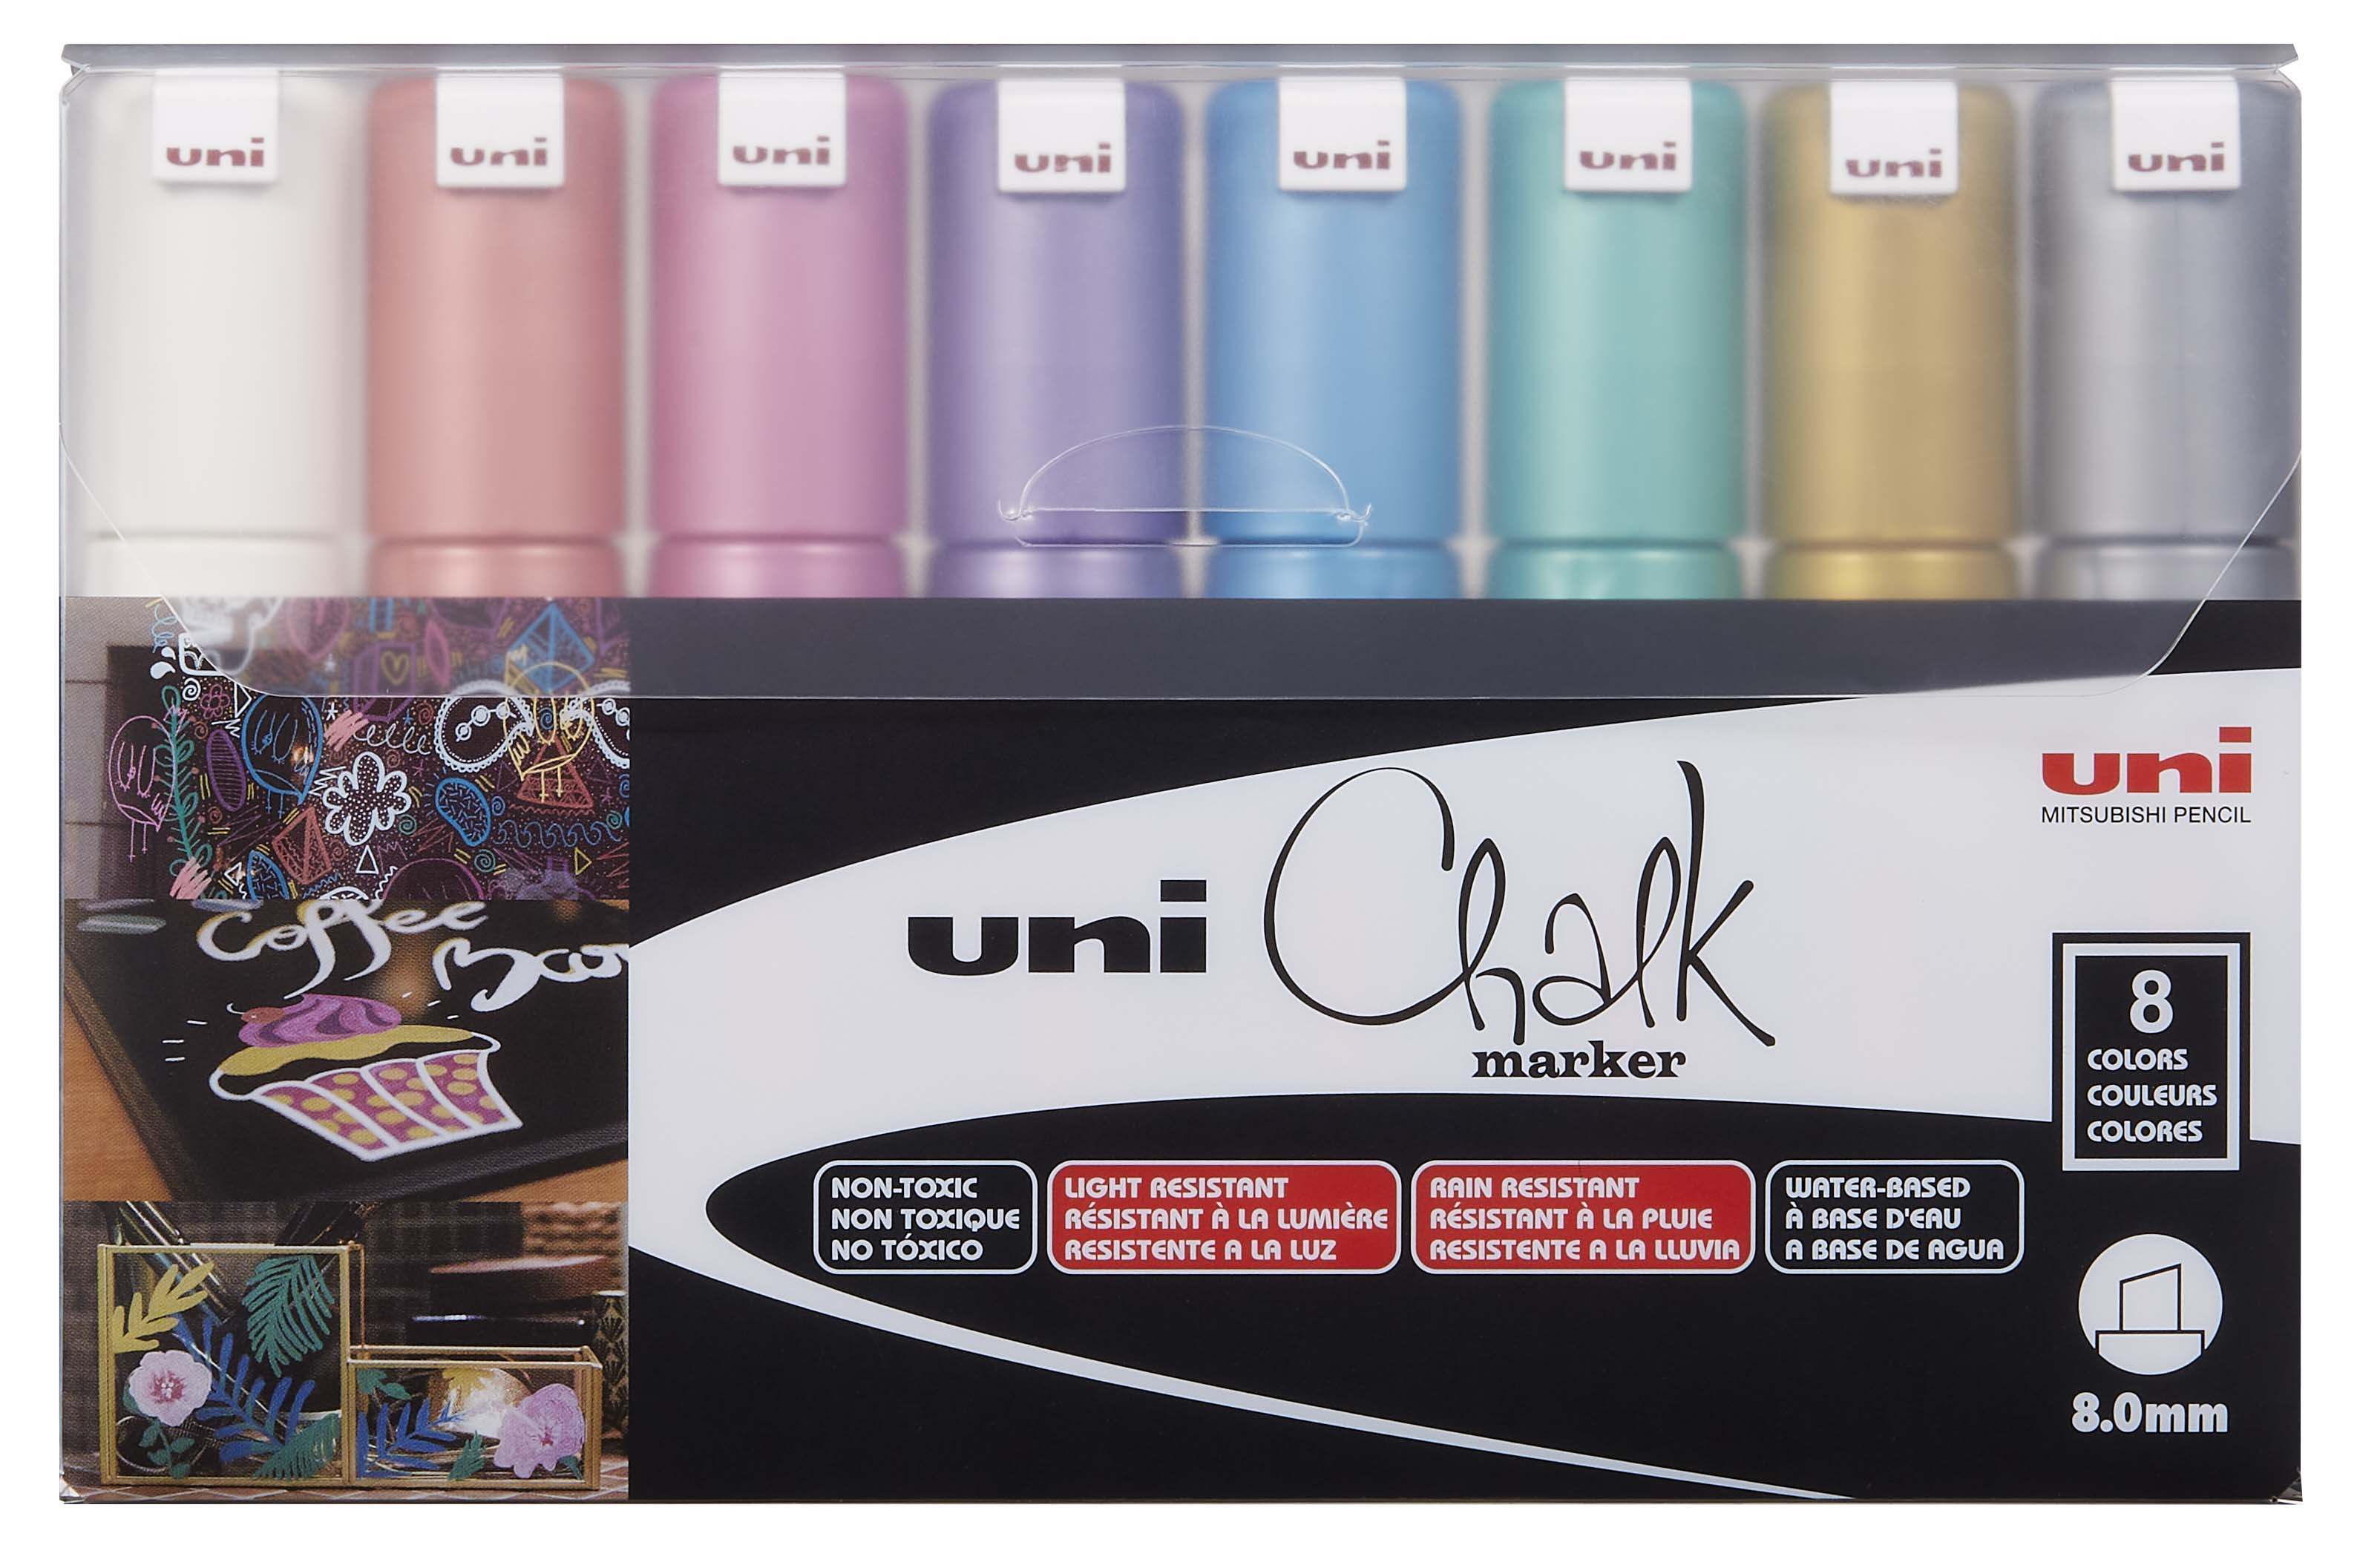 Teacher Created Resources Chalk Markers, Assorted Tip, Assorted, 8